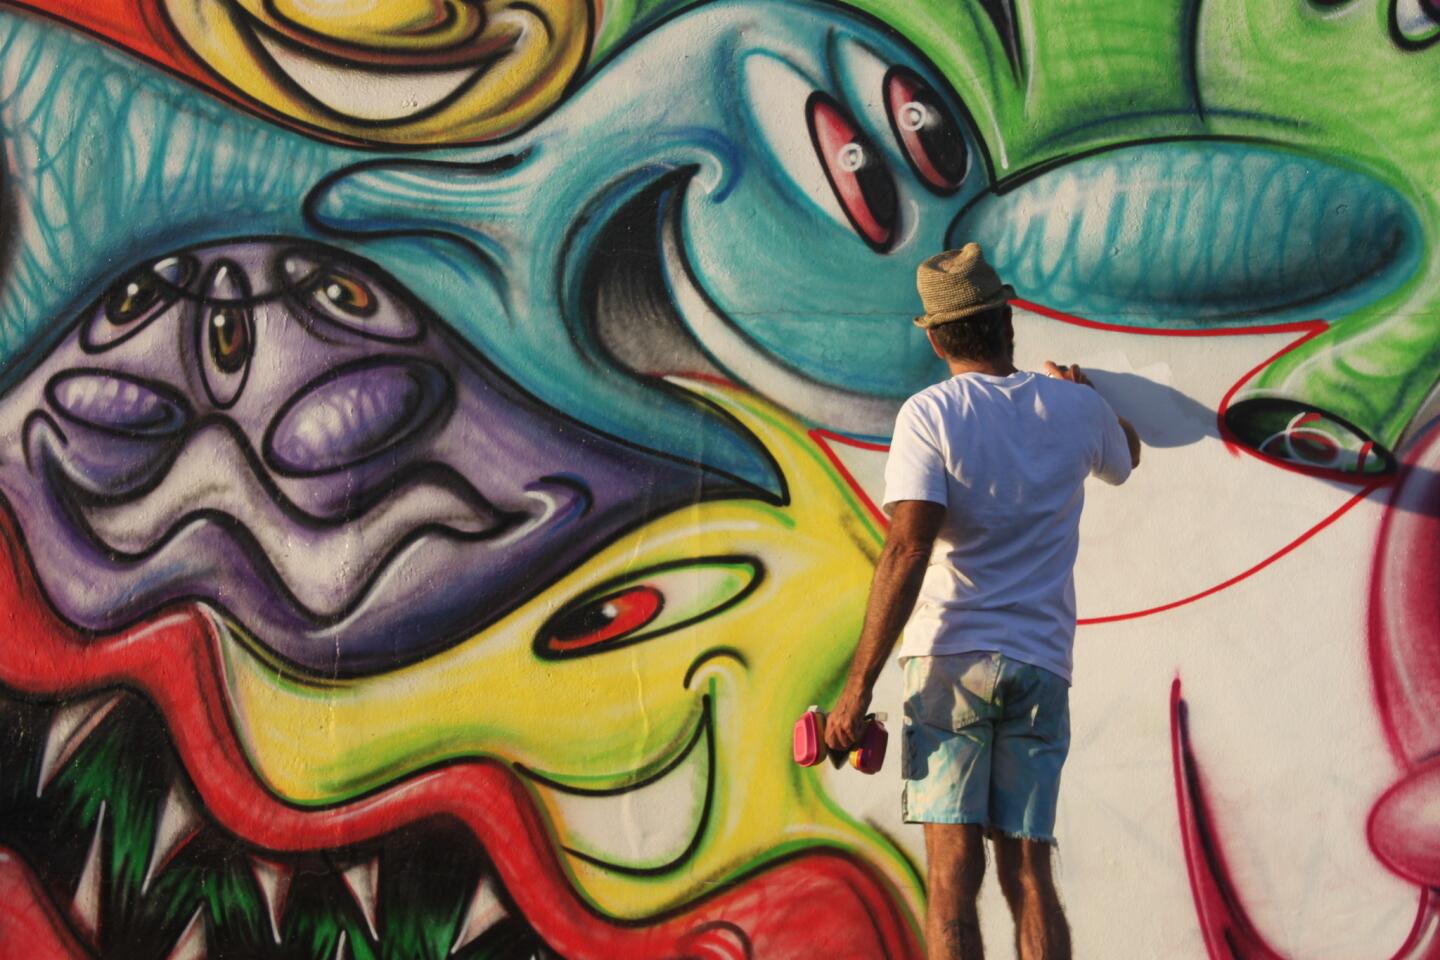 Pictures: Wynwood street art district in Miami